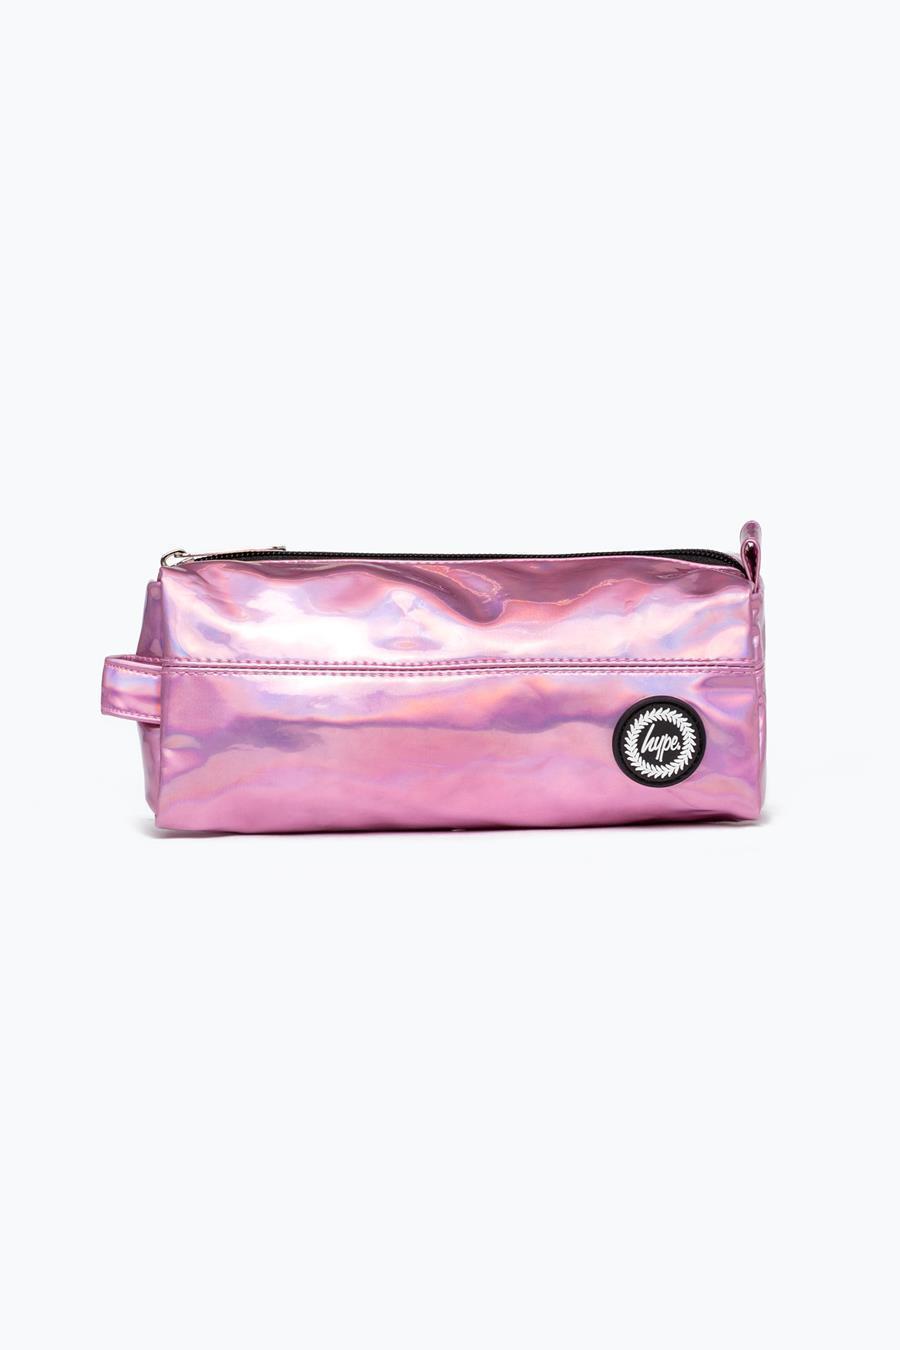 HYPE PINK HOLOGRAPHIC PENCIL CASE